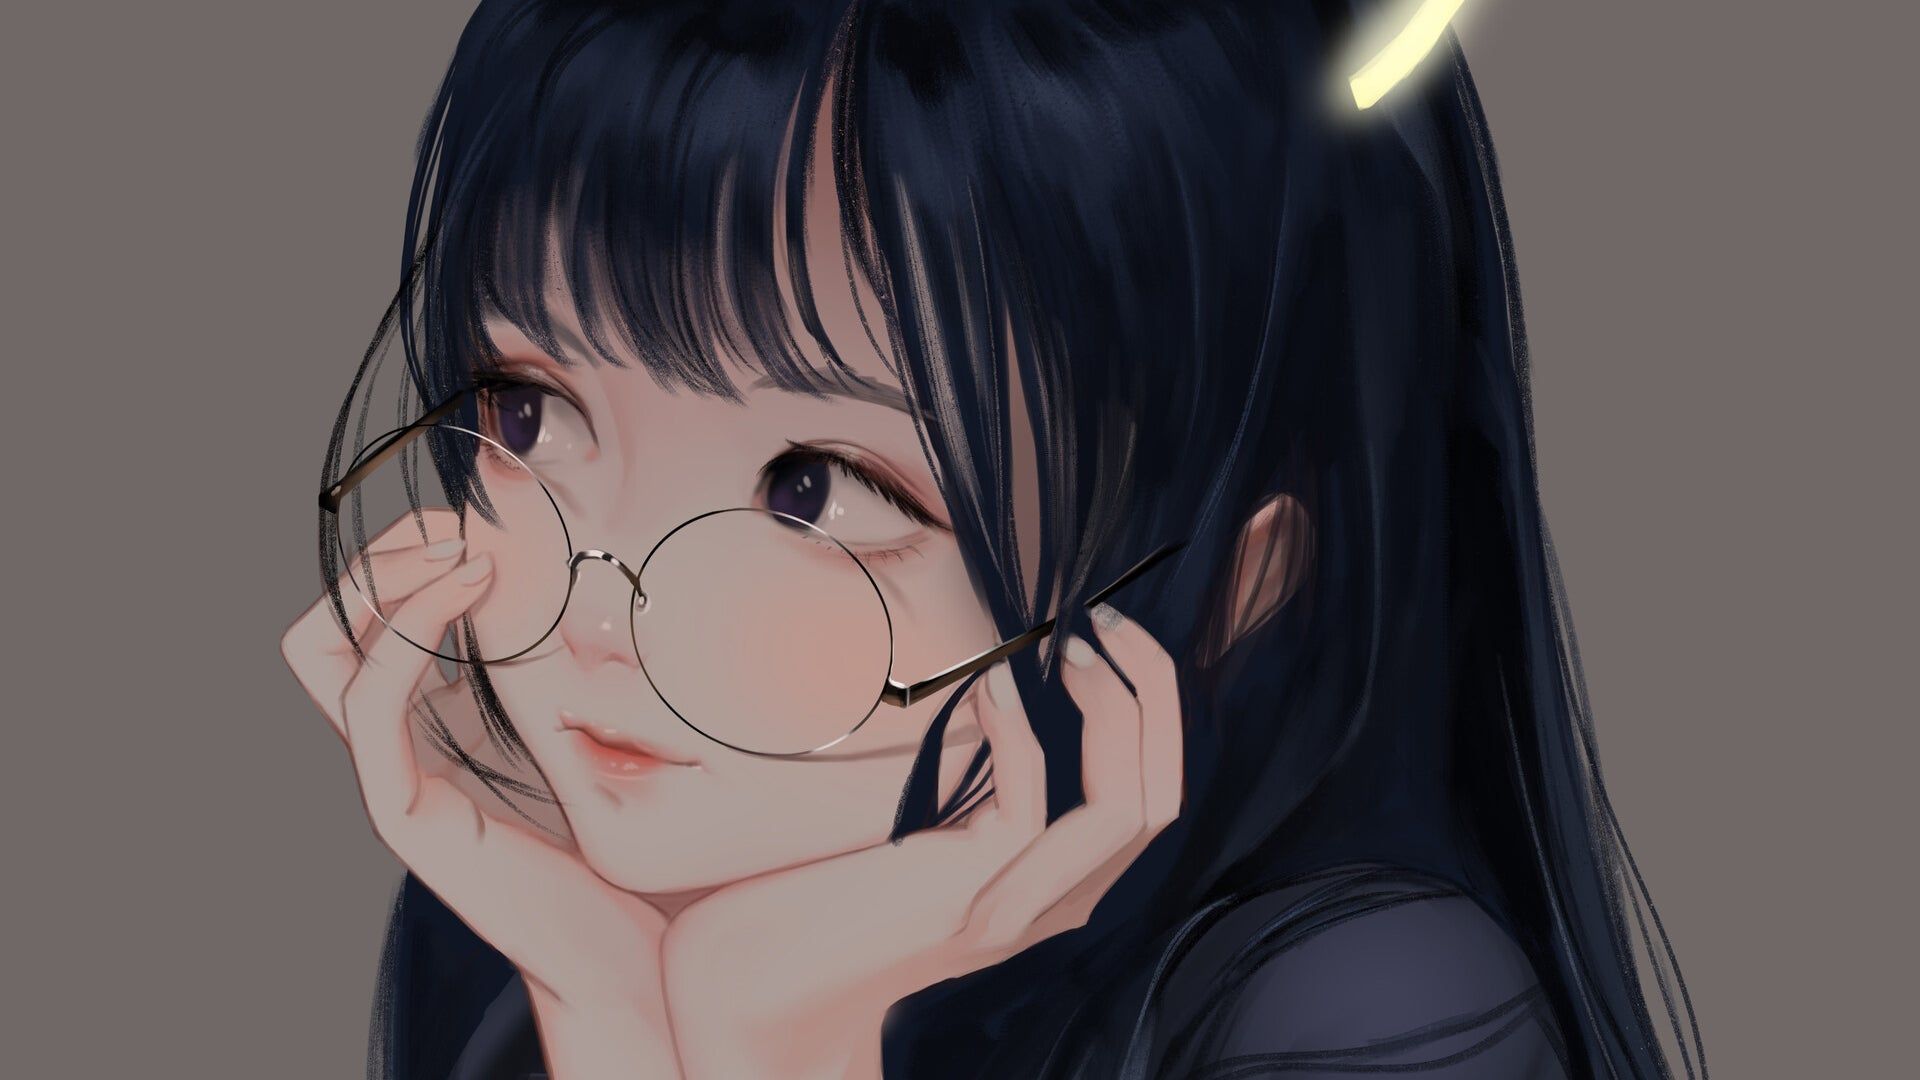 Cute Anime Girl with Glasses